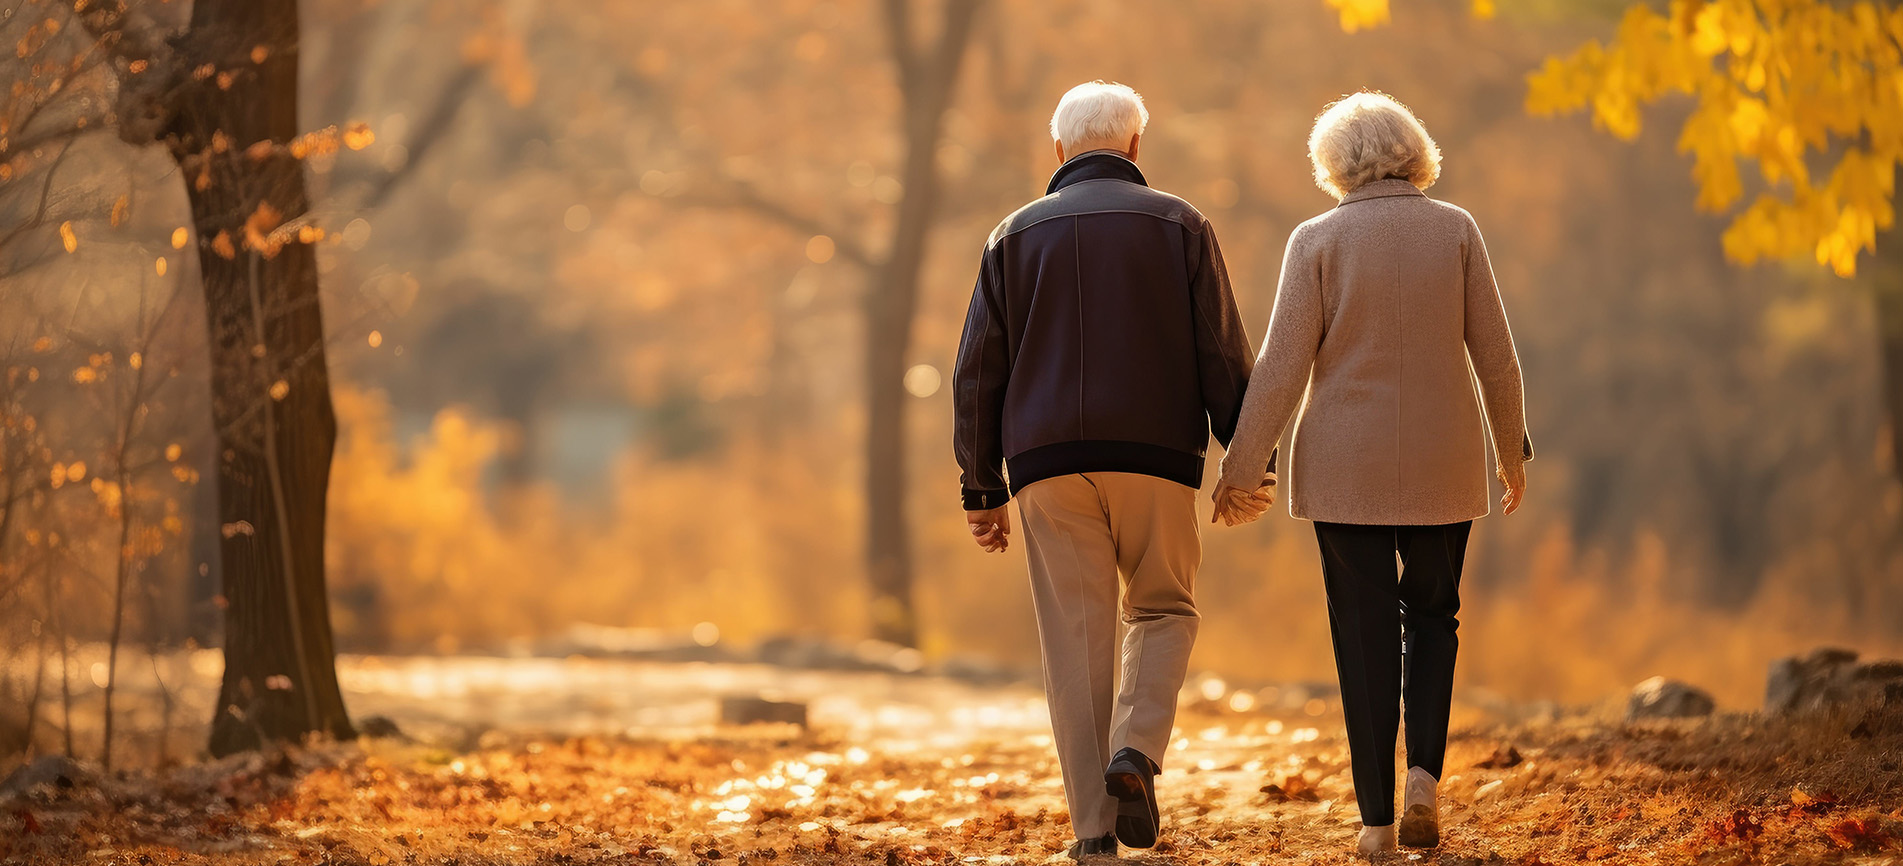 An older couple walk hand-in-hand on a lovely autumn afternoon among trees and fallen, golden leaves.